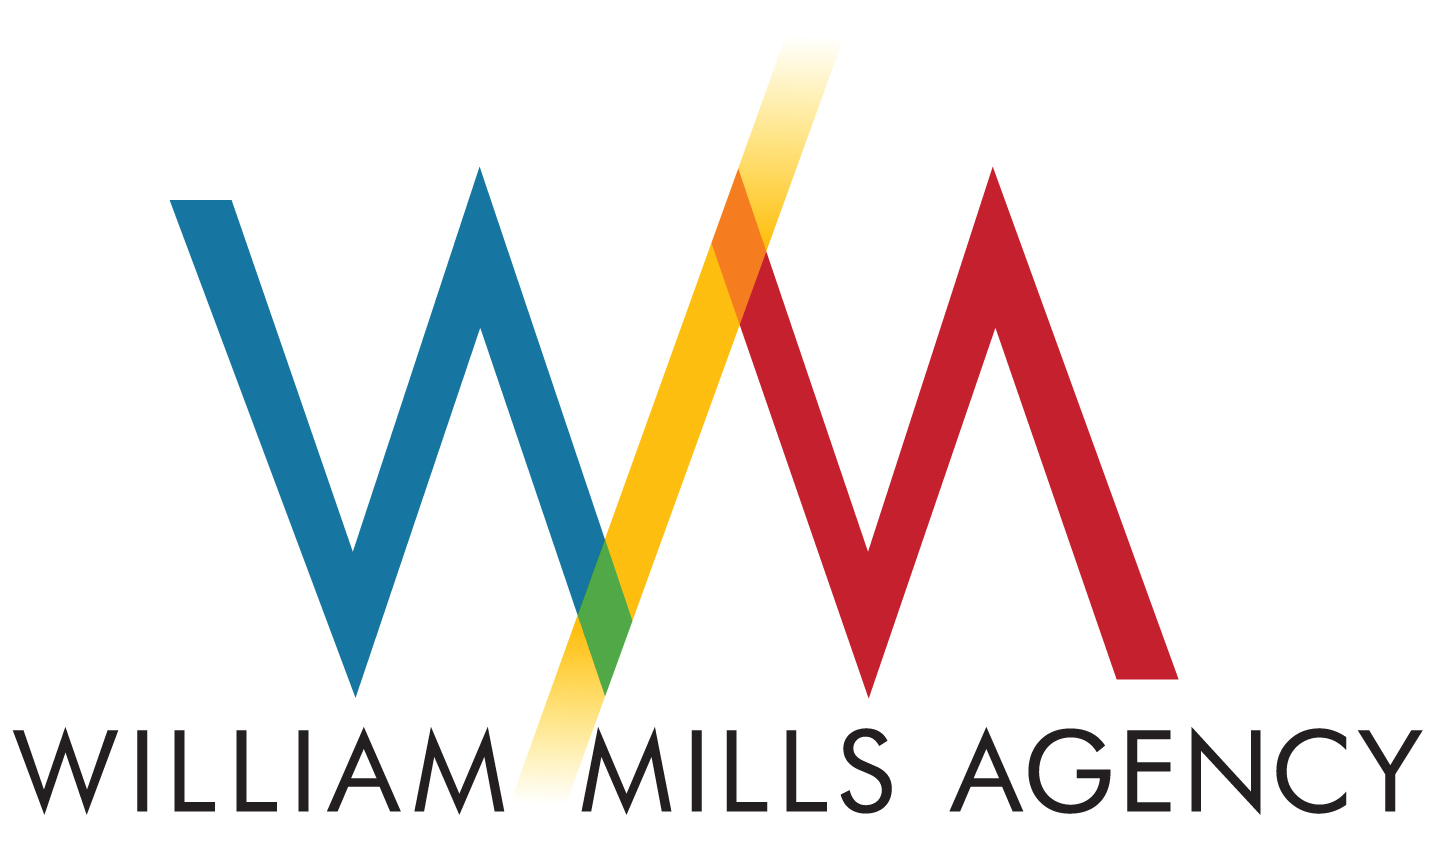 Digital Transformation Services ​Company Aequilibrium Chooses William Mills Agency for Public Relations Services thumbnail